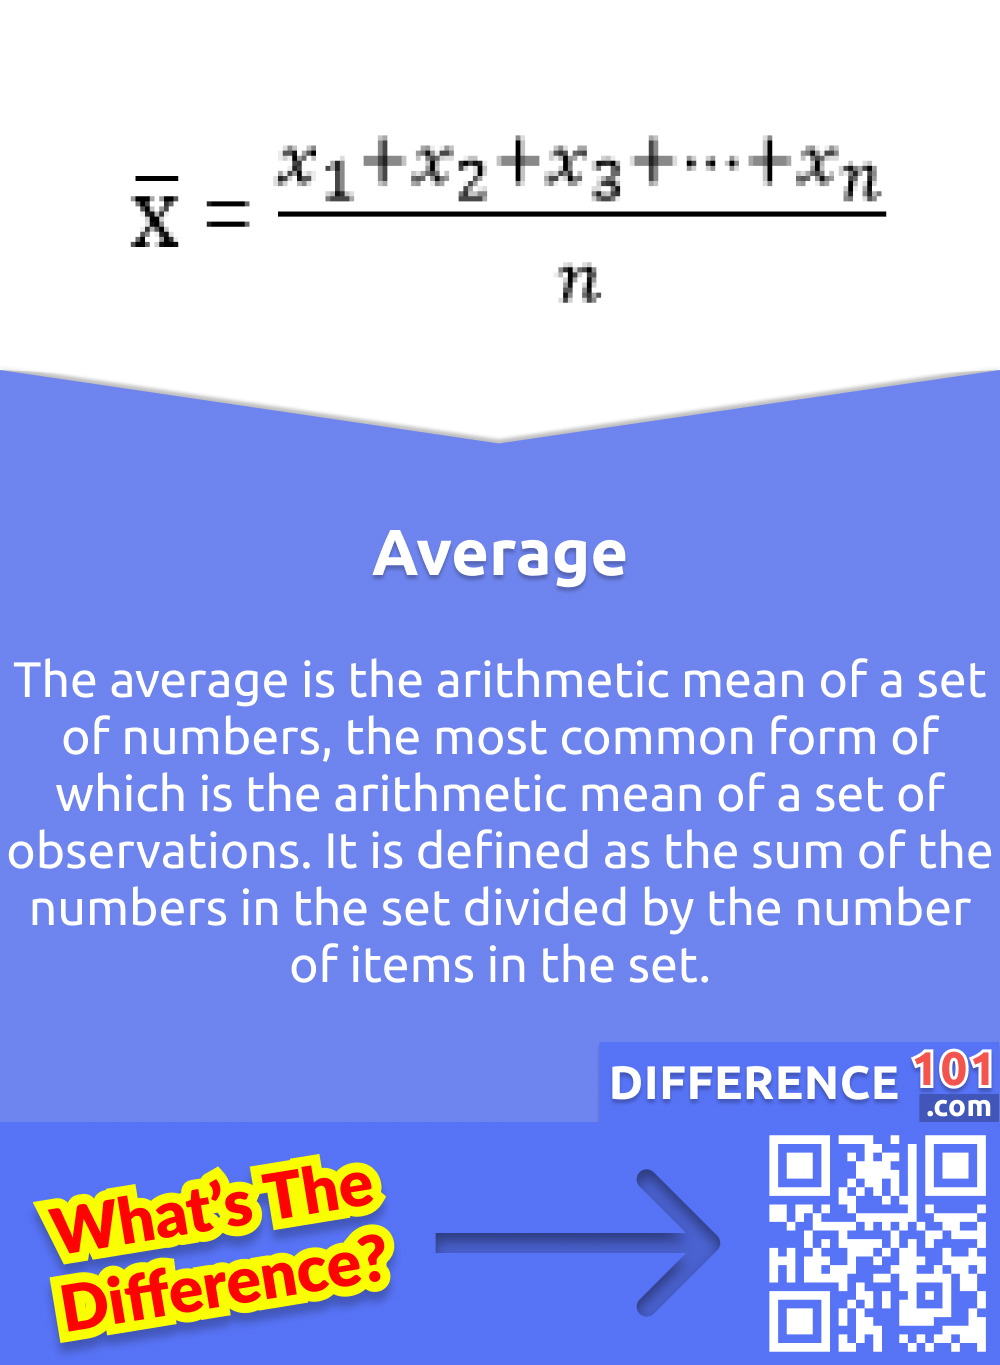 What Is Average? The average is the arithmetic mean of a set of numbers, the most common form of which is the arithmetic mean of a set of observations. It is defined as the sum of the numbers in the set divided by the number of items in the set. The arithmetic mean of a set of numbers x1, x2, ..., xn is denoted by x̄ and is given by x̄ = (x1 + x2 + ... + xn)/n.